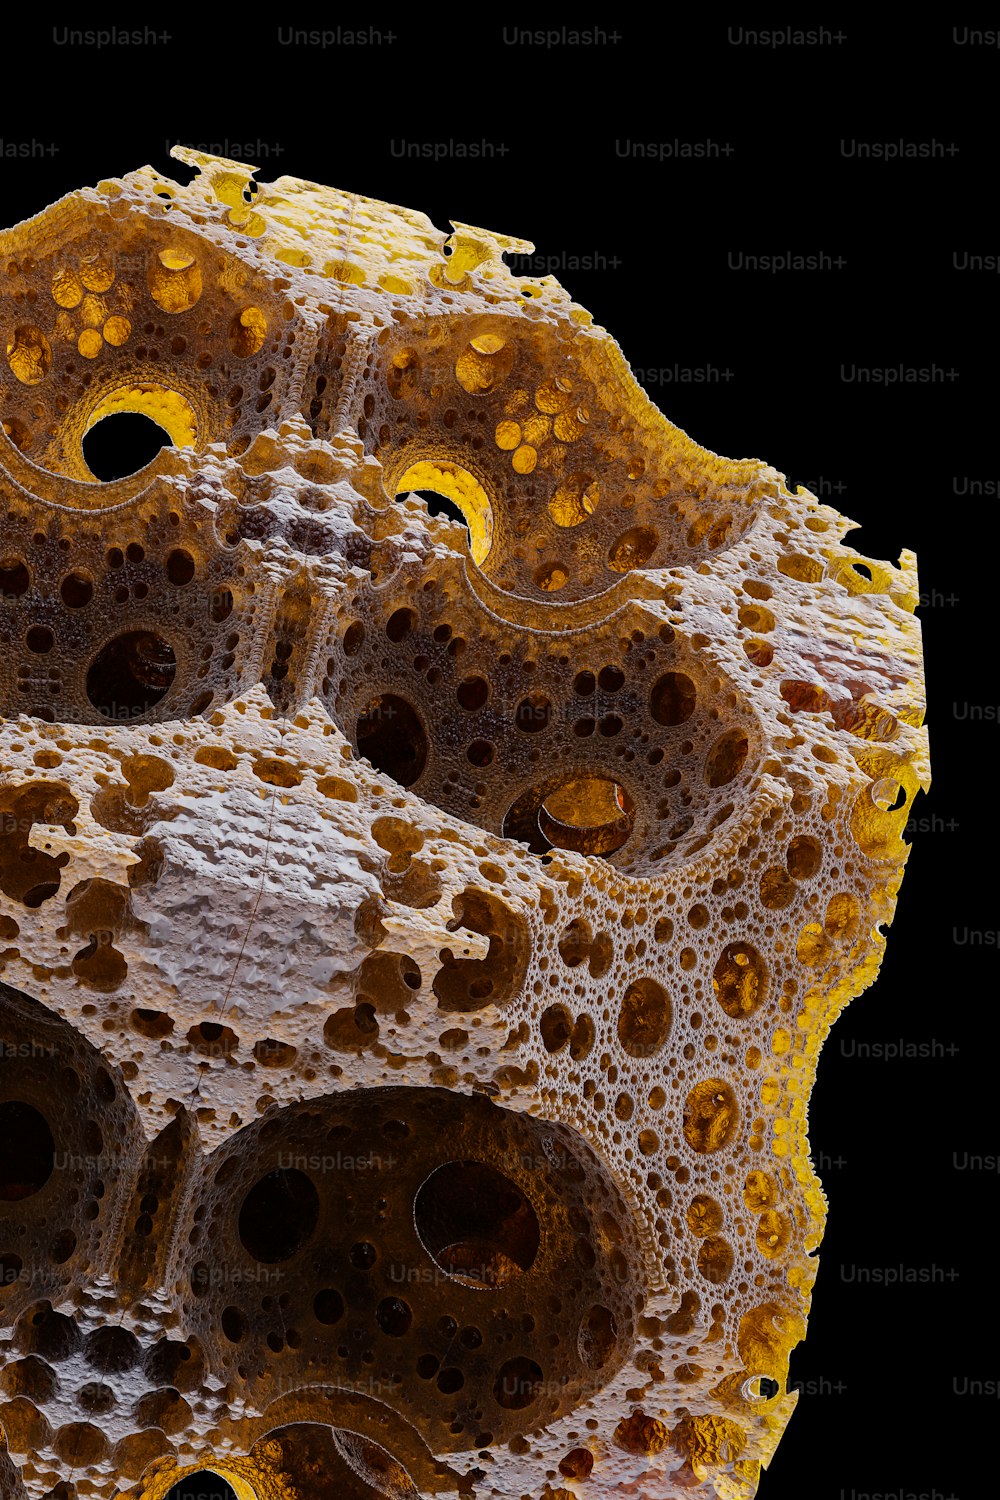 a close up view of some water bubbles